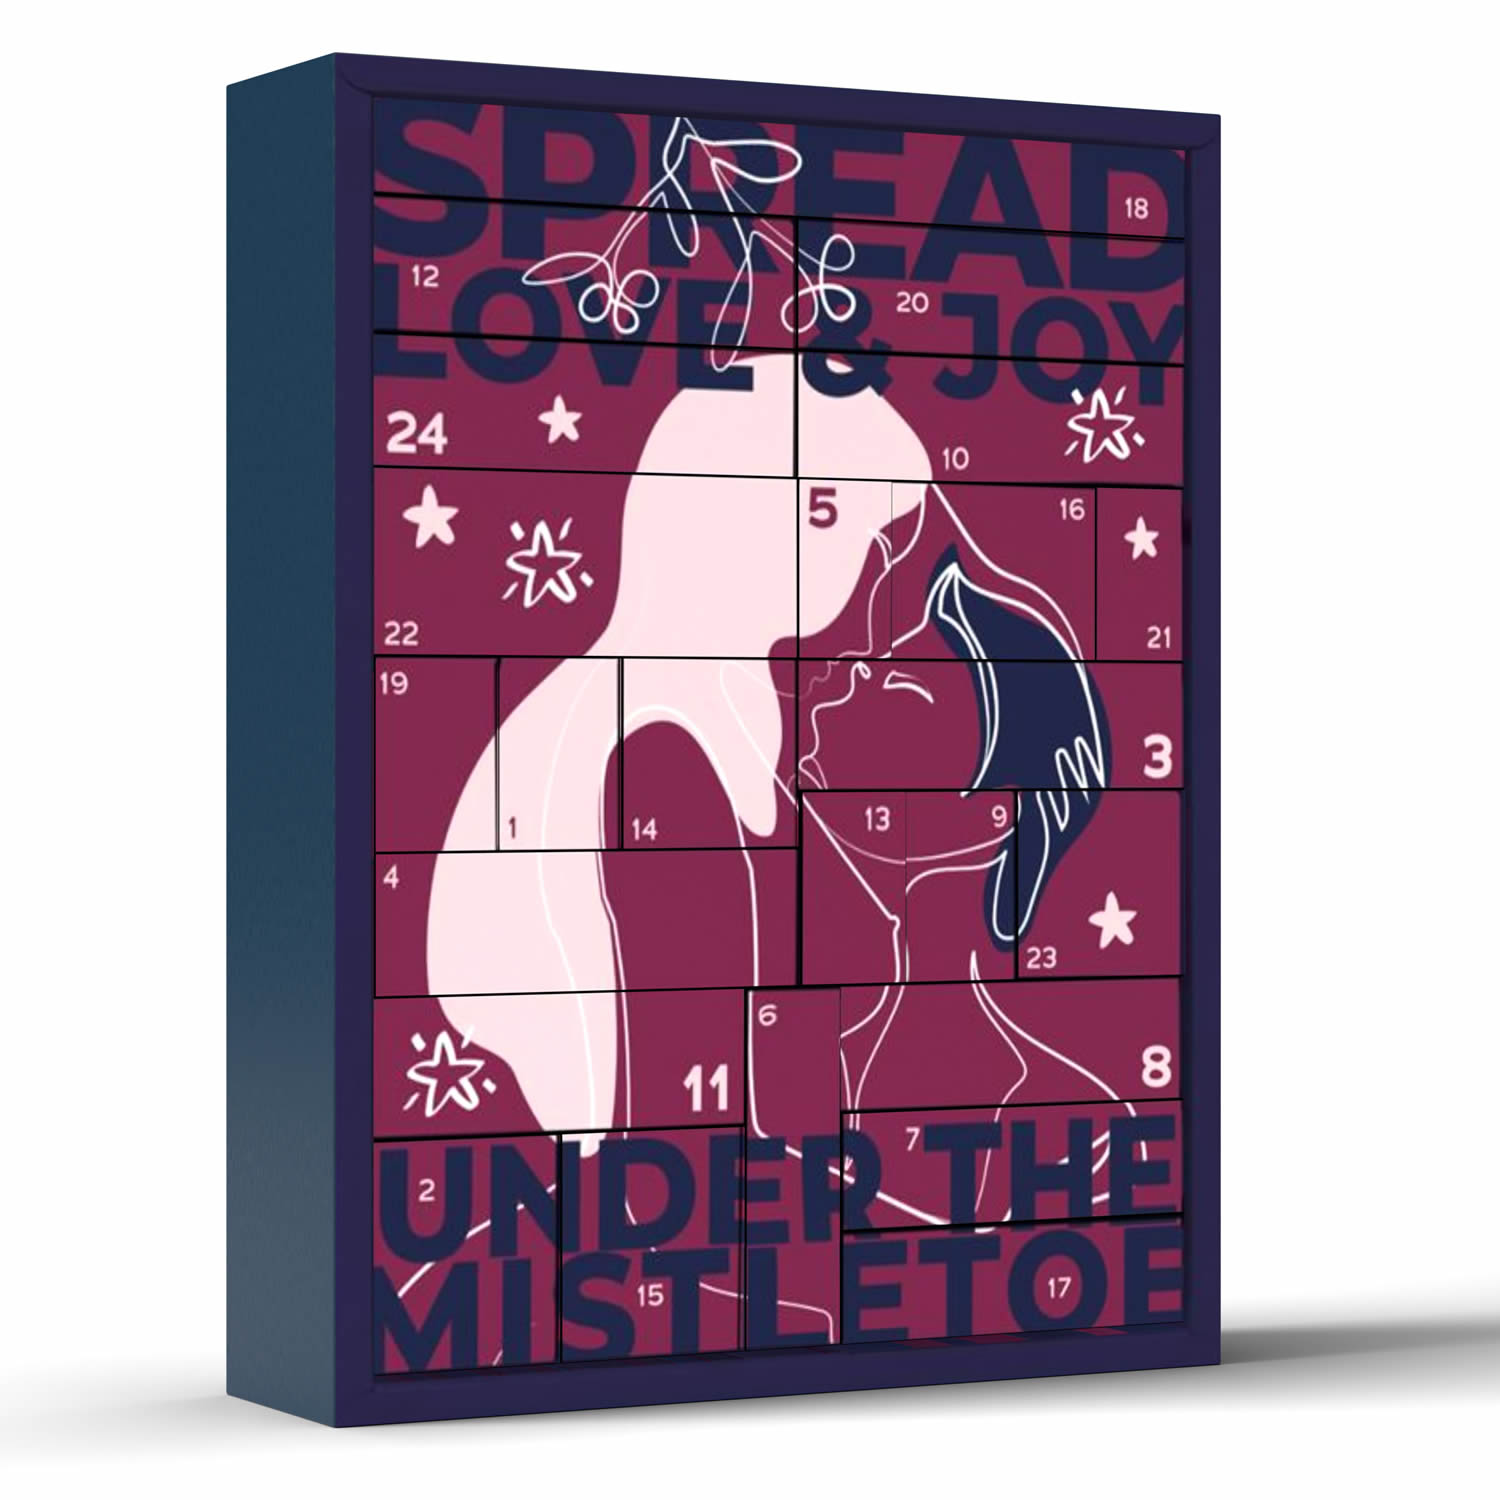 Erotic Advent Calendar with Sex Toys and Lingeri